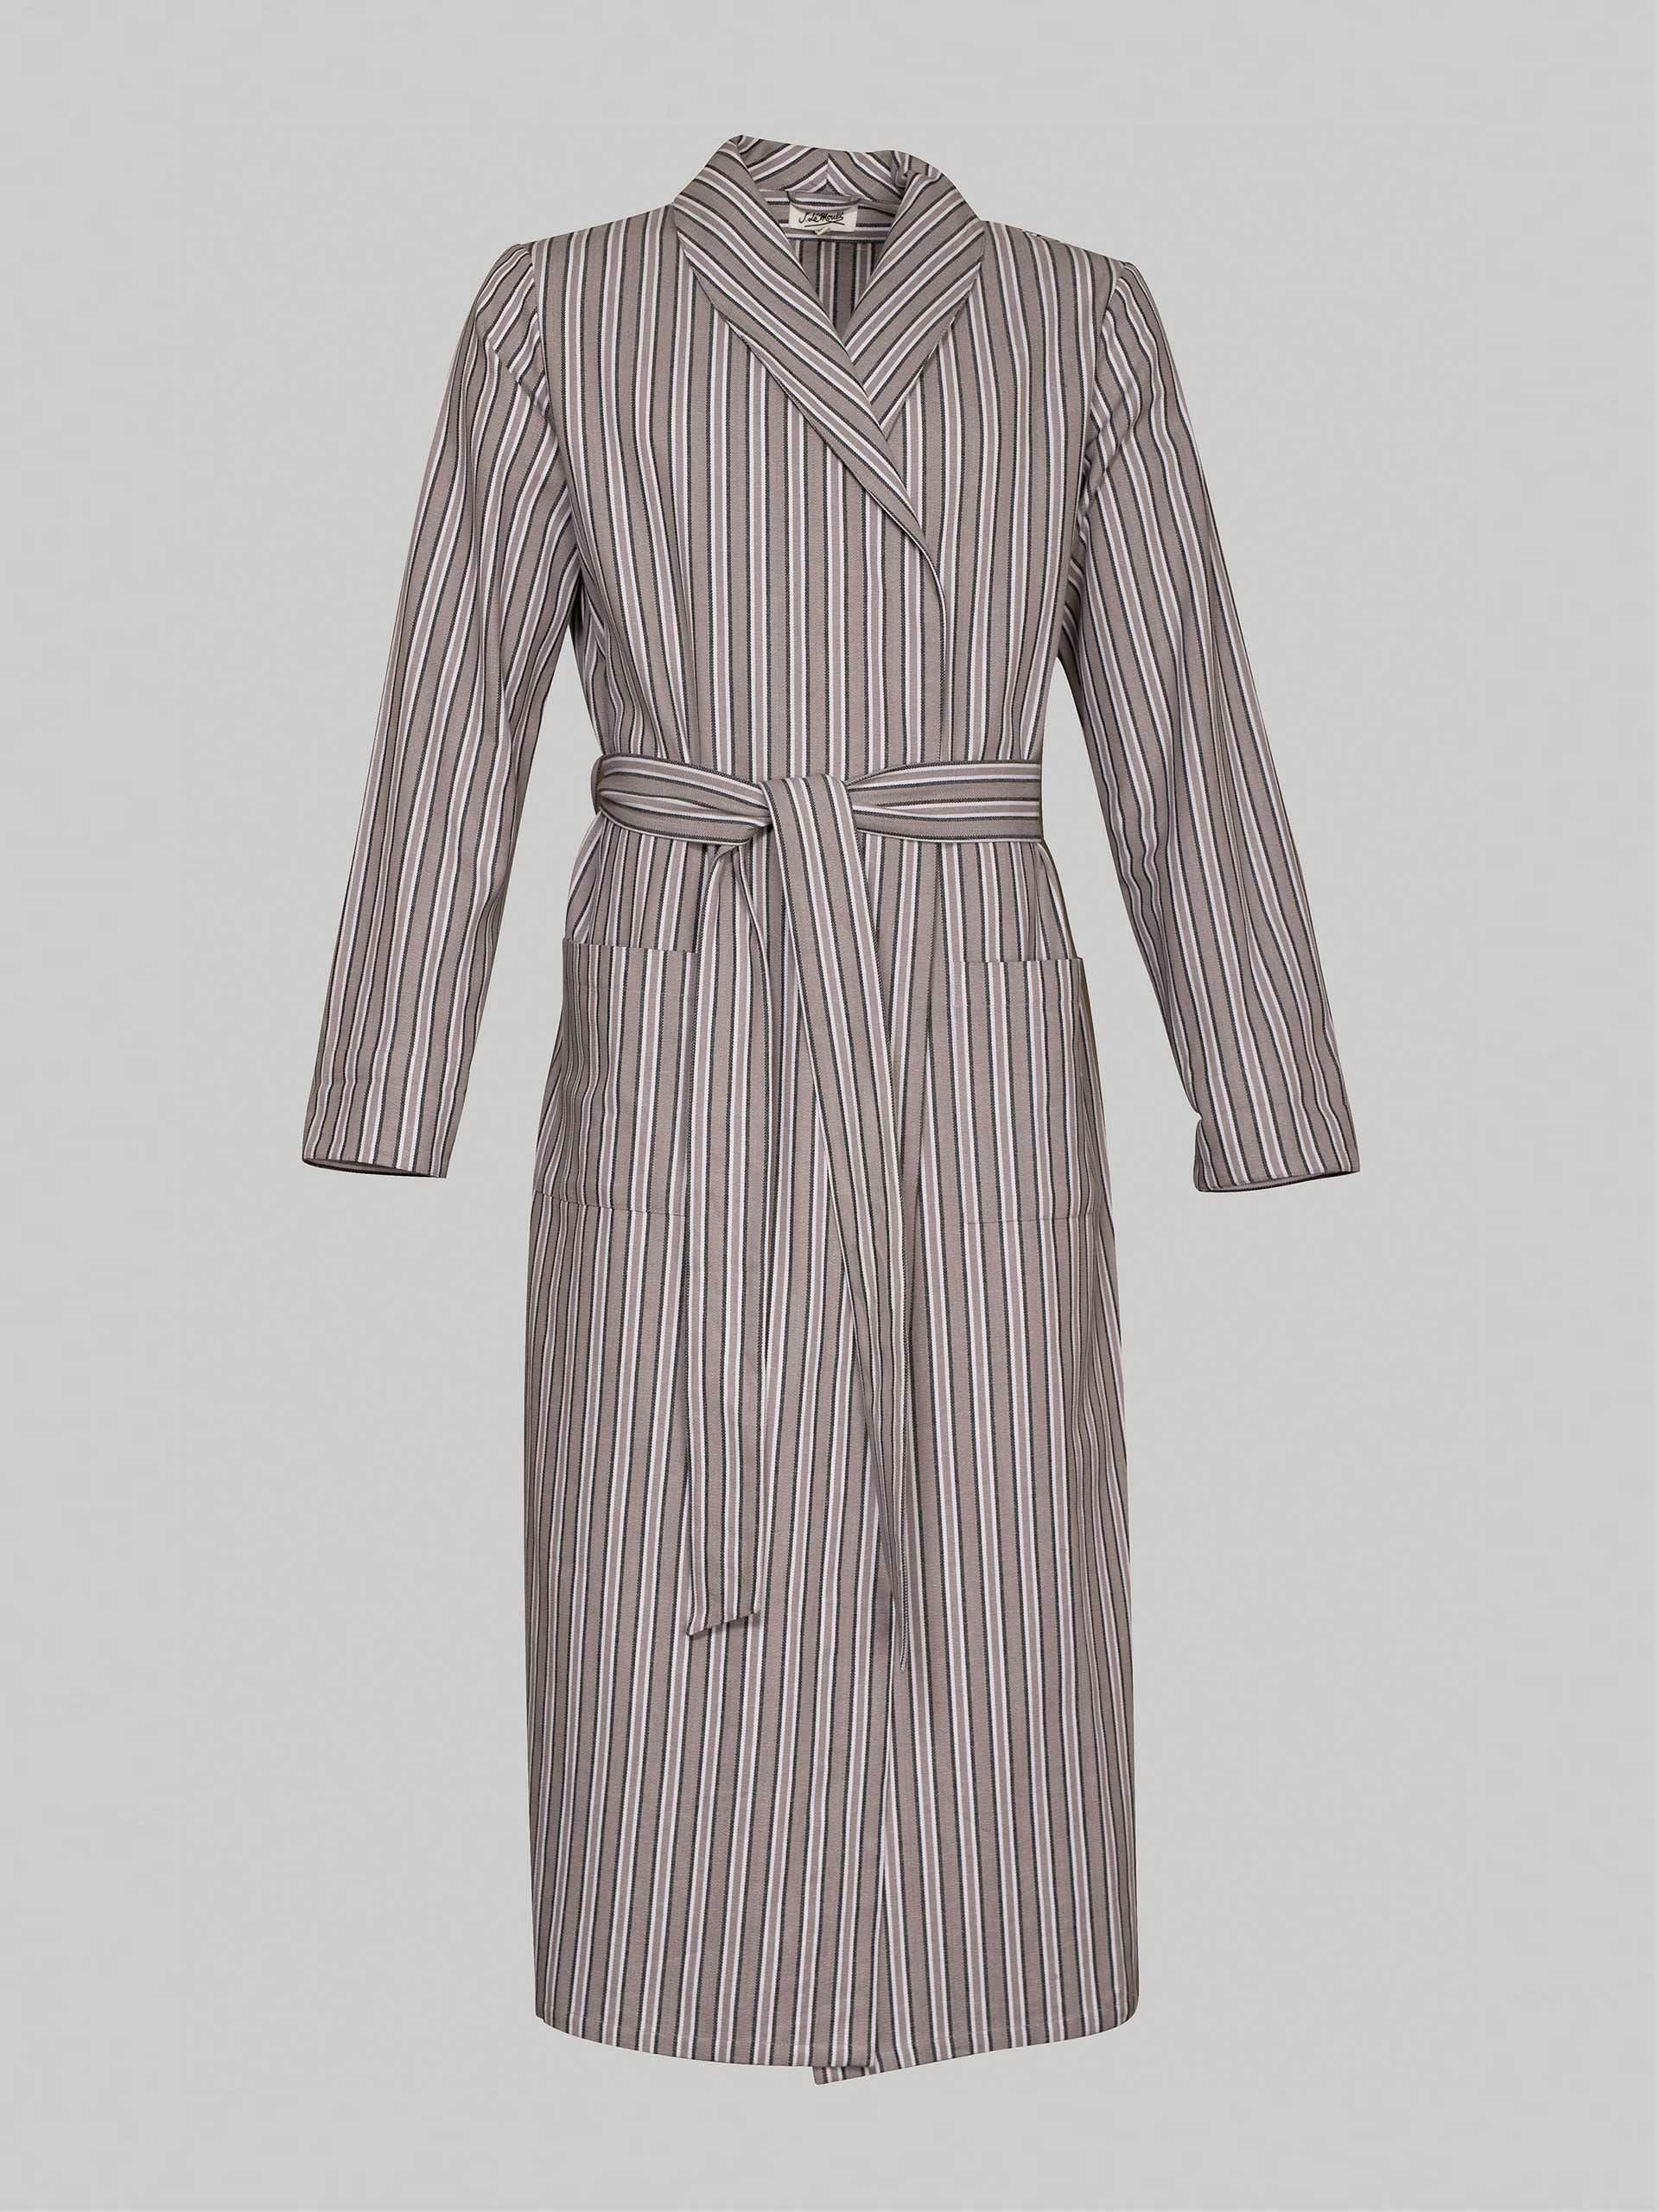 Striped cotton dressing gown